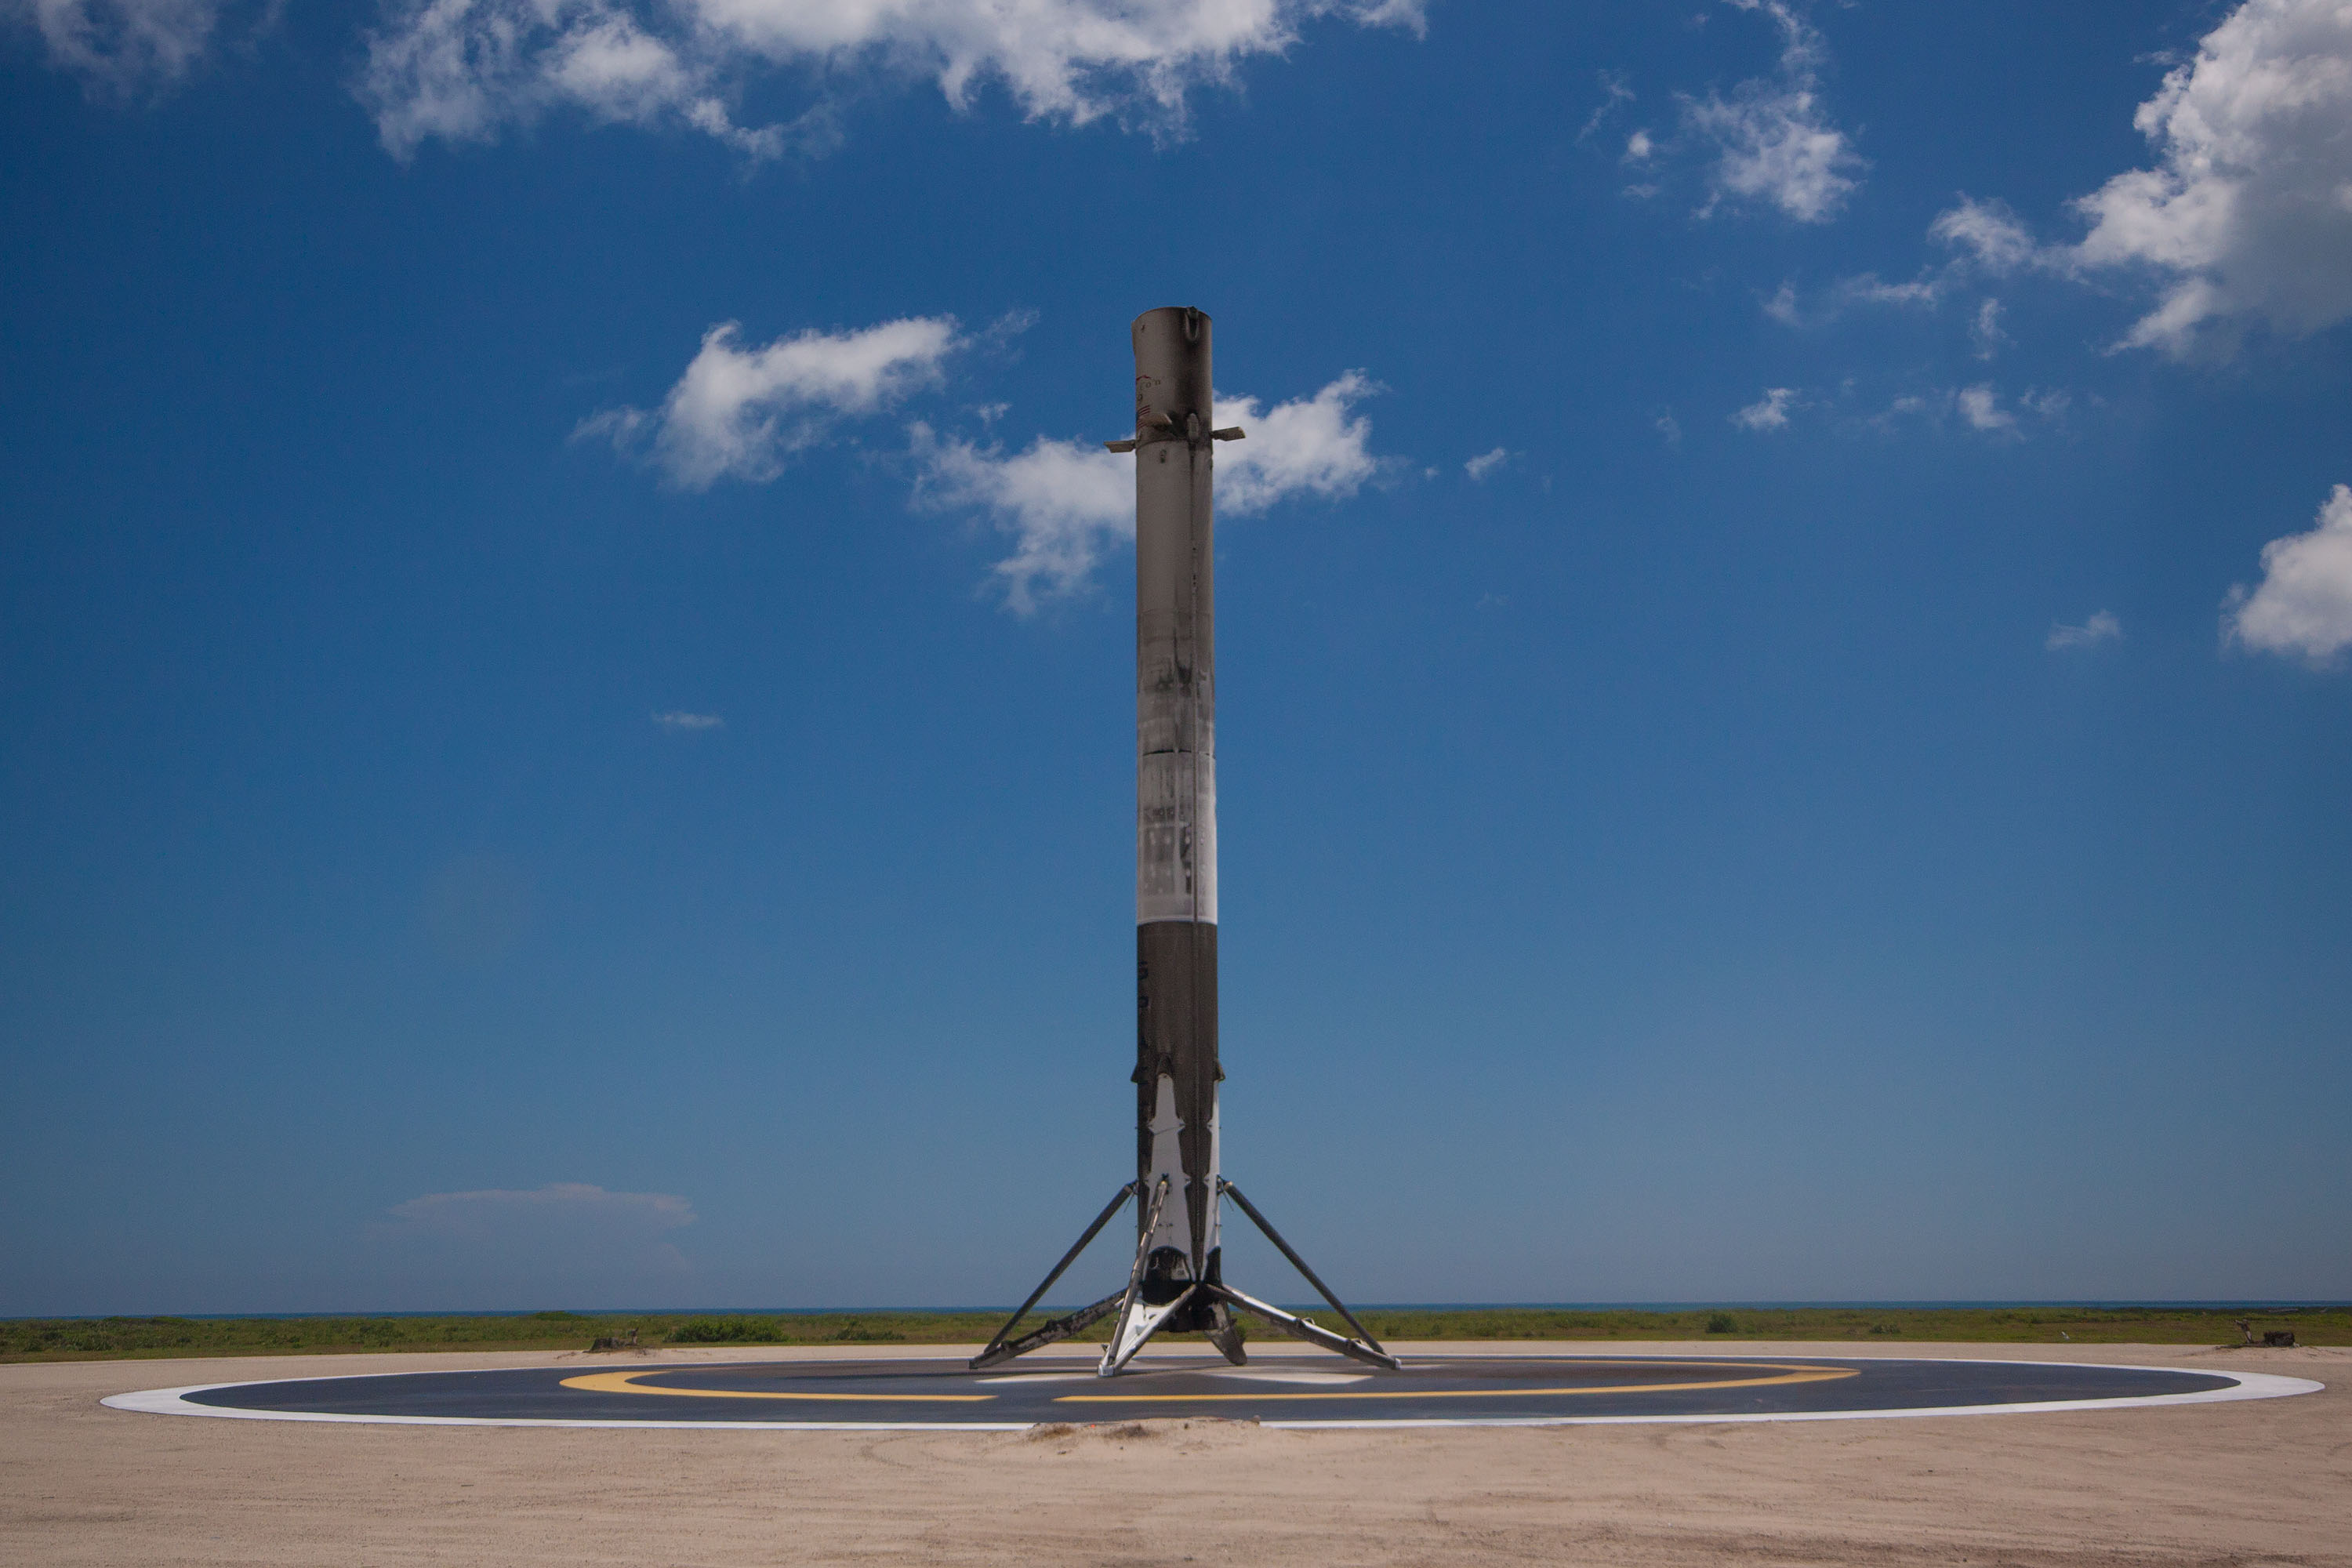 CRS-12 B1039 (SpaceX)